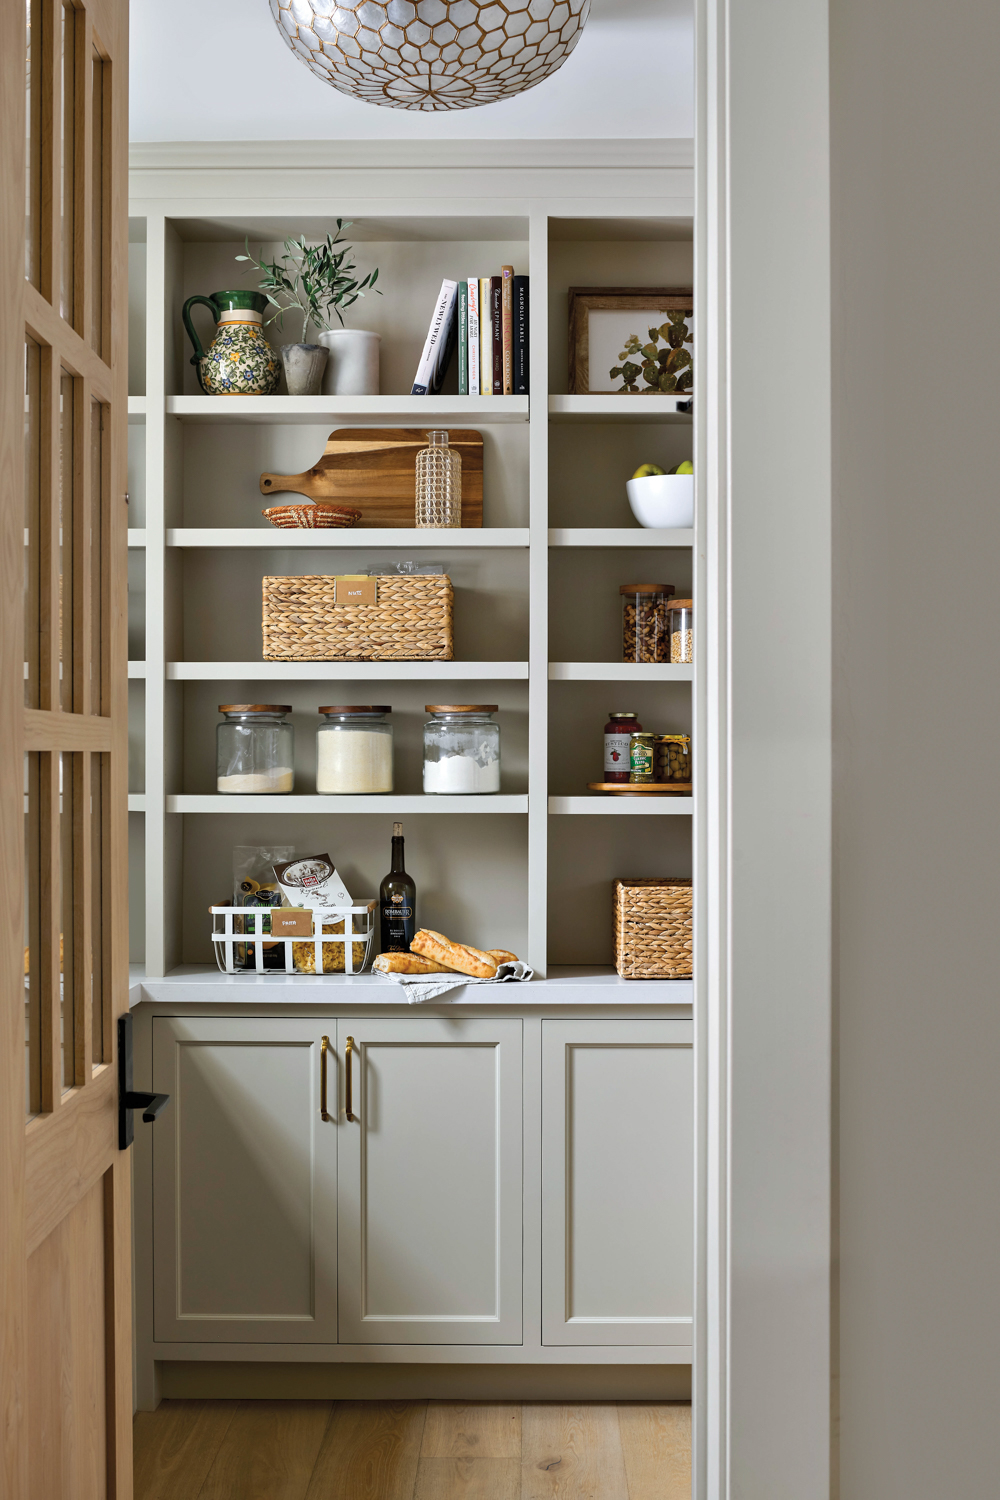 Pantry with built-in cabinetry and...